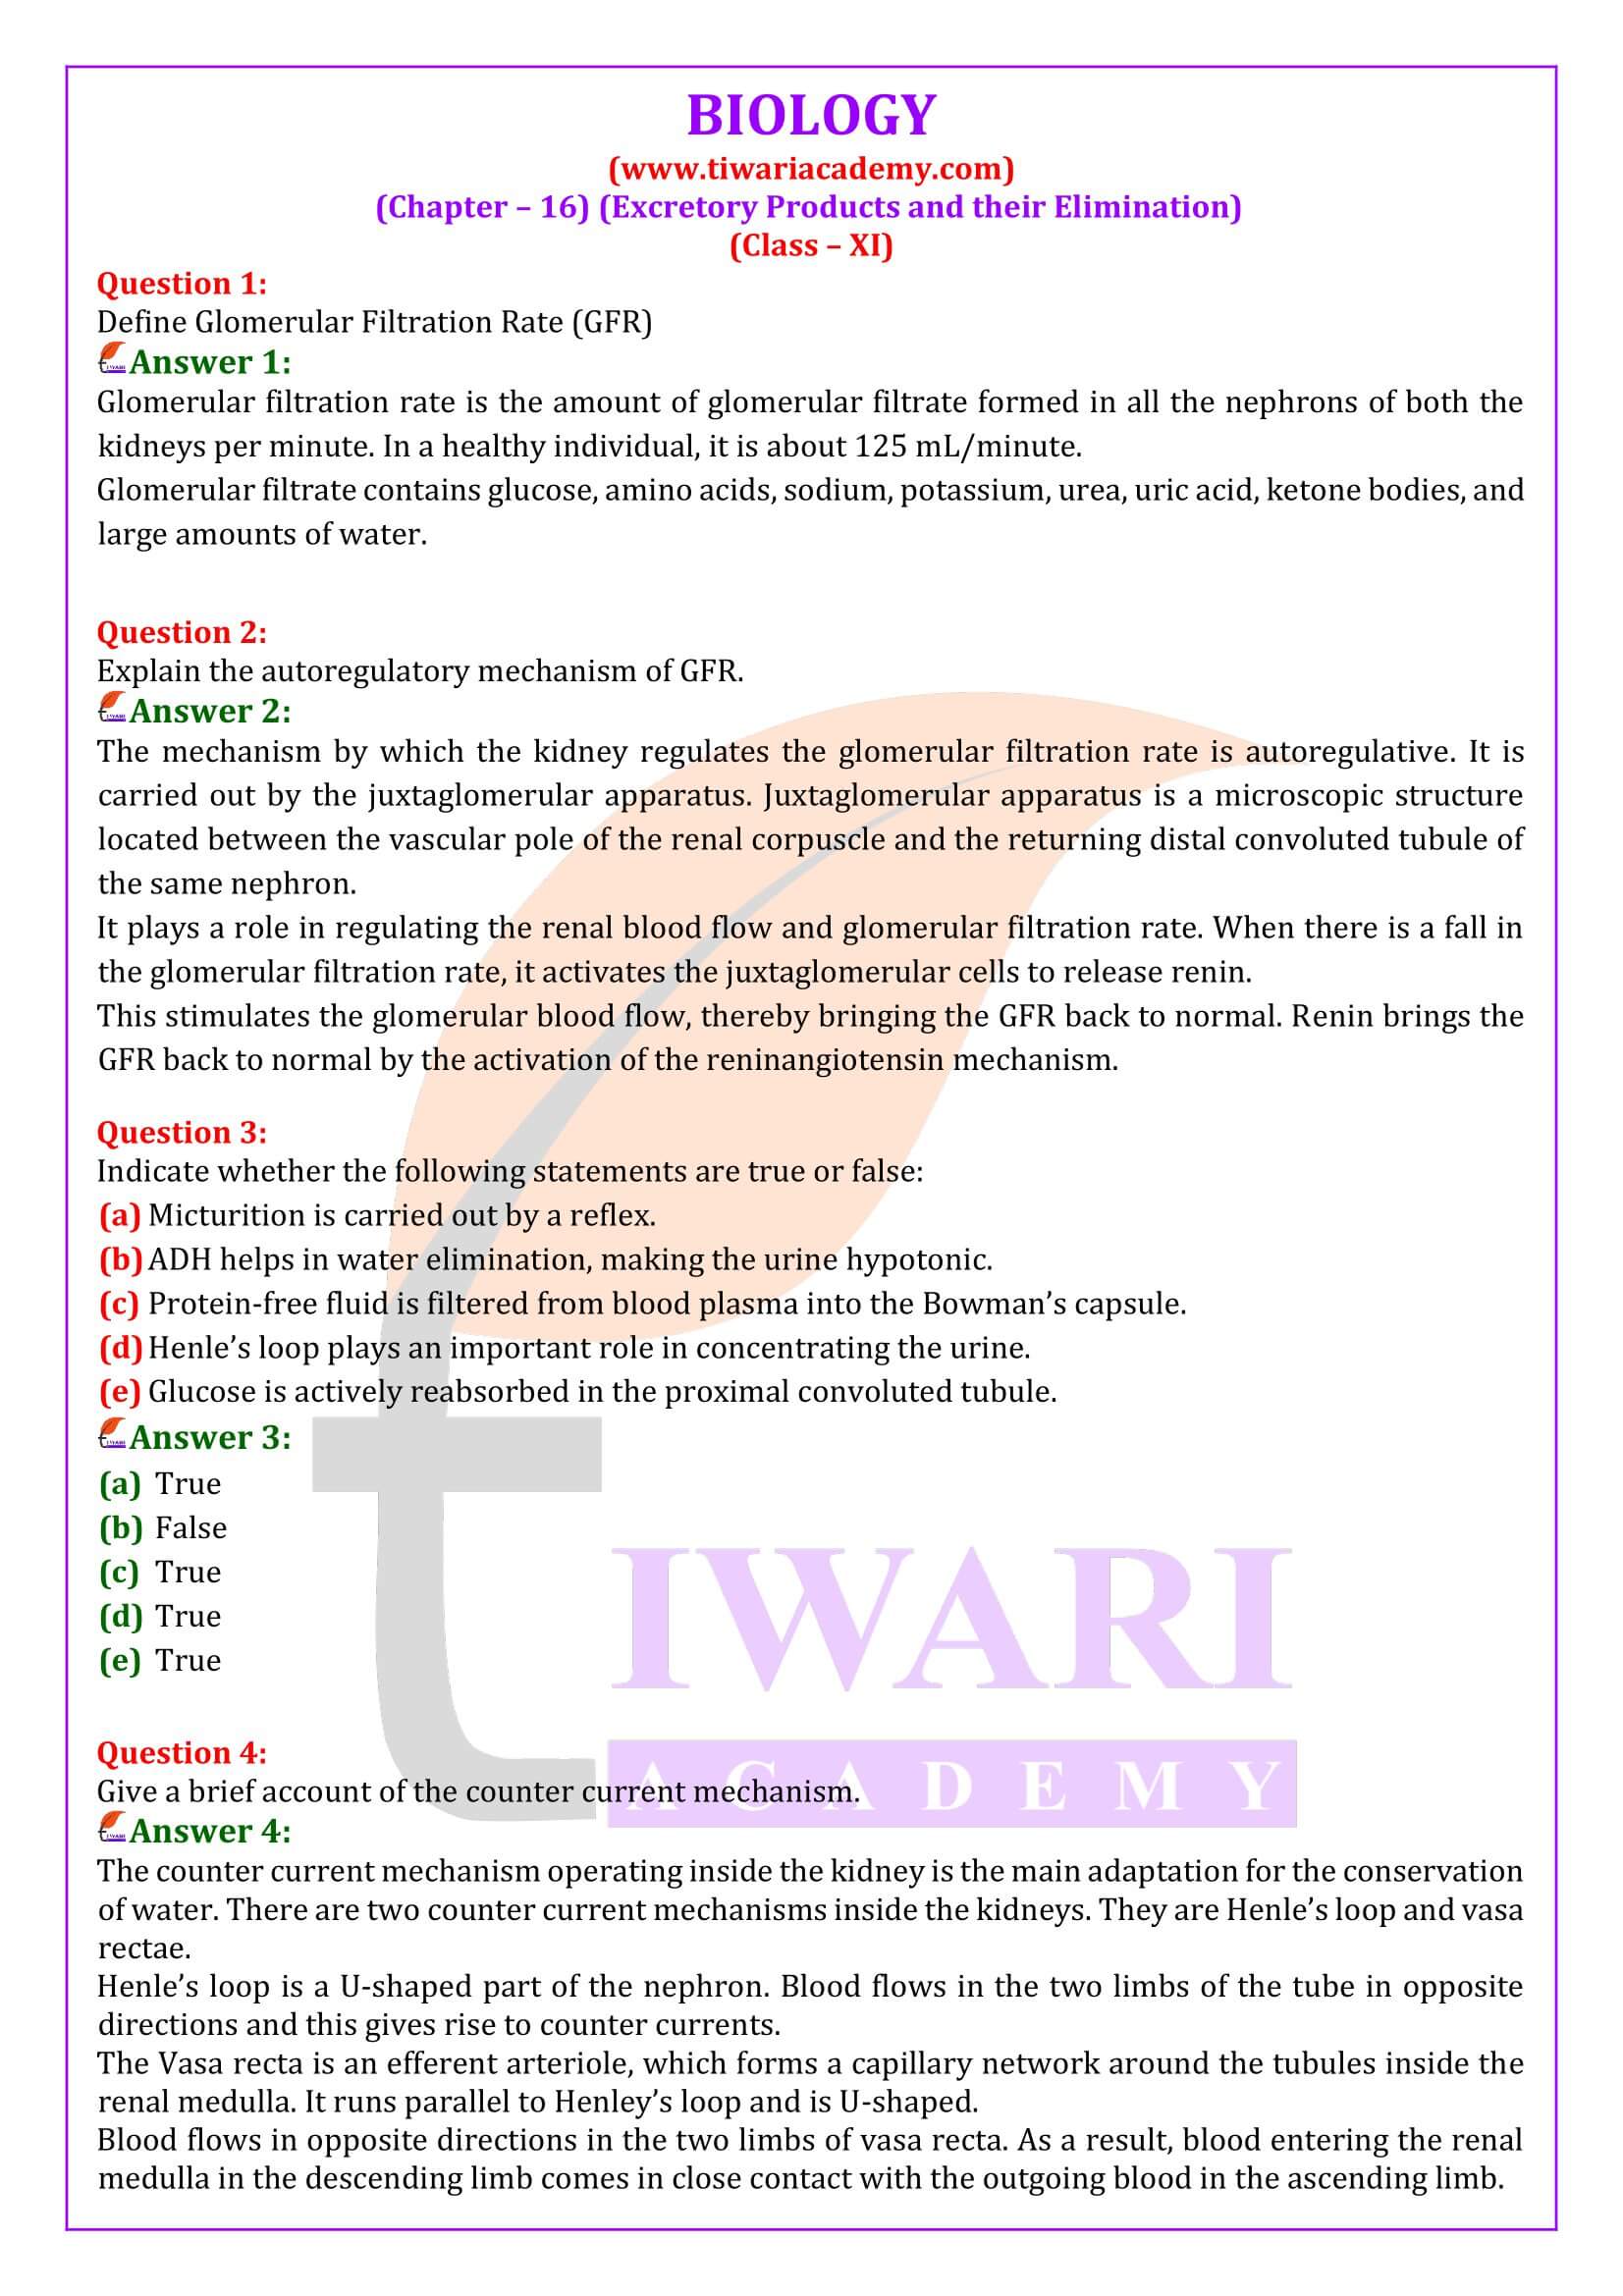 NCERT Solutions for Class 11 Biology Chapter 16